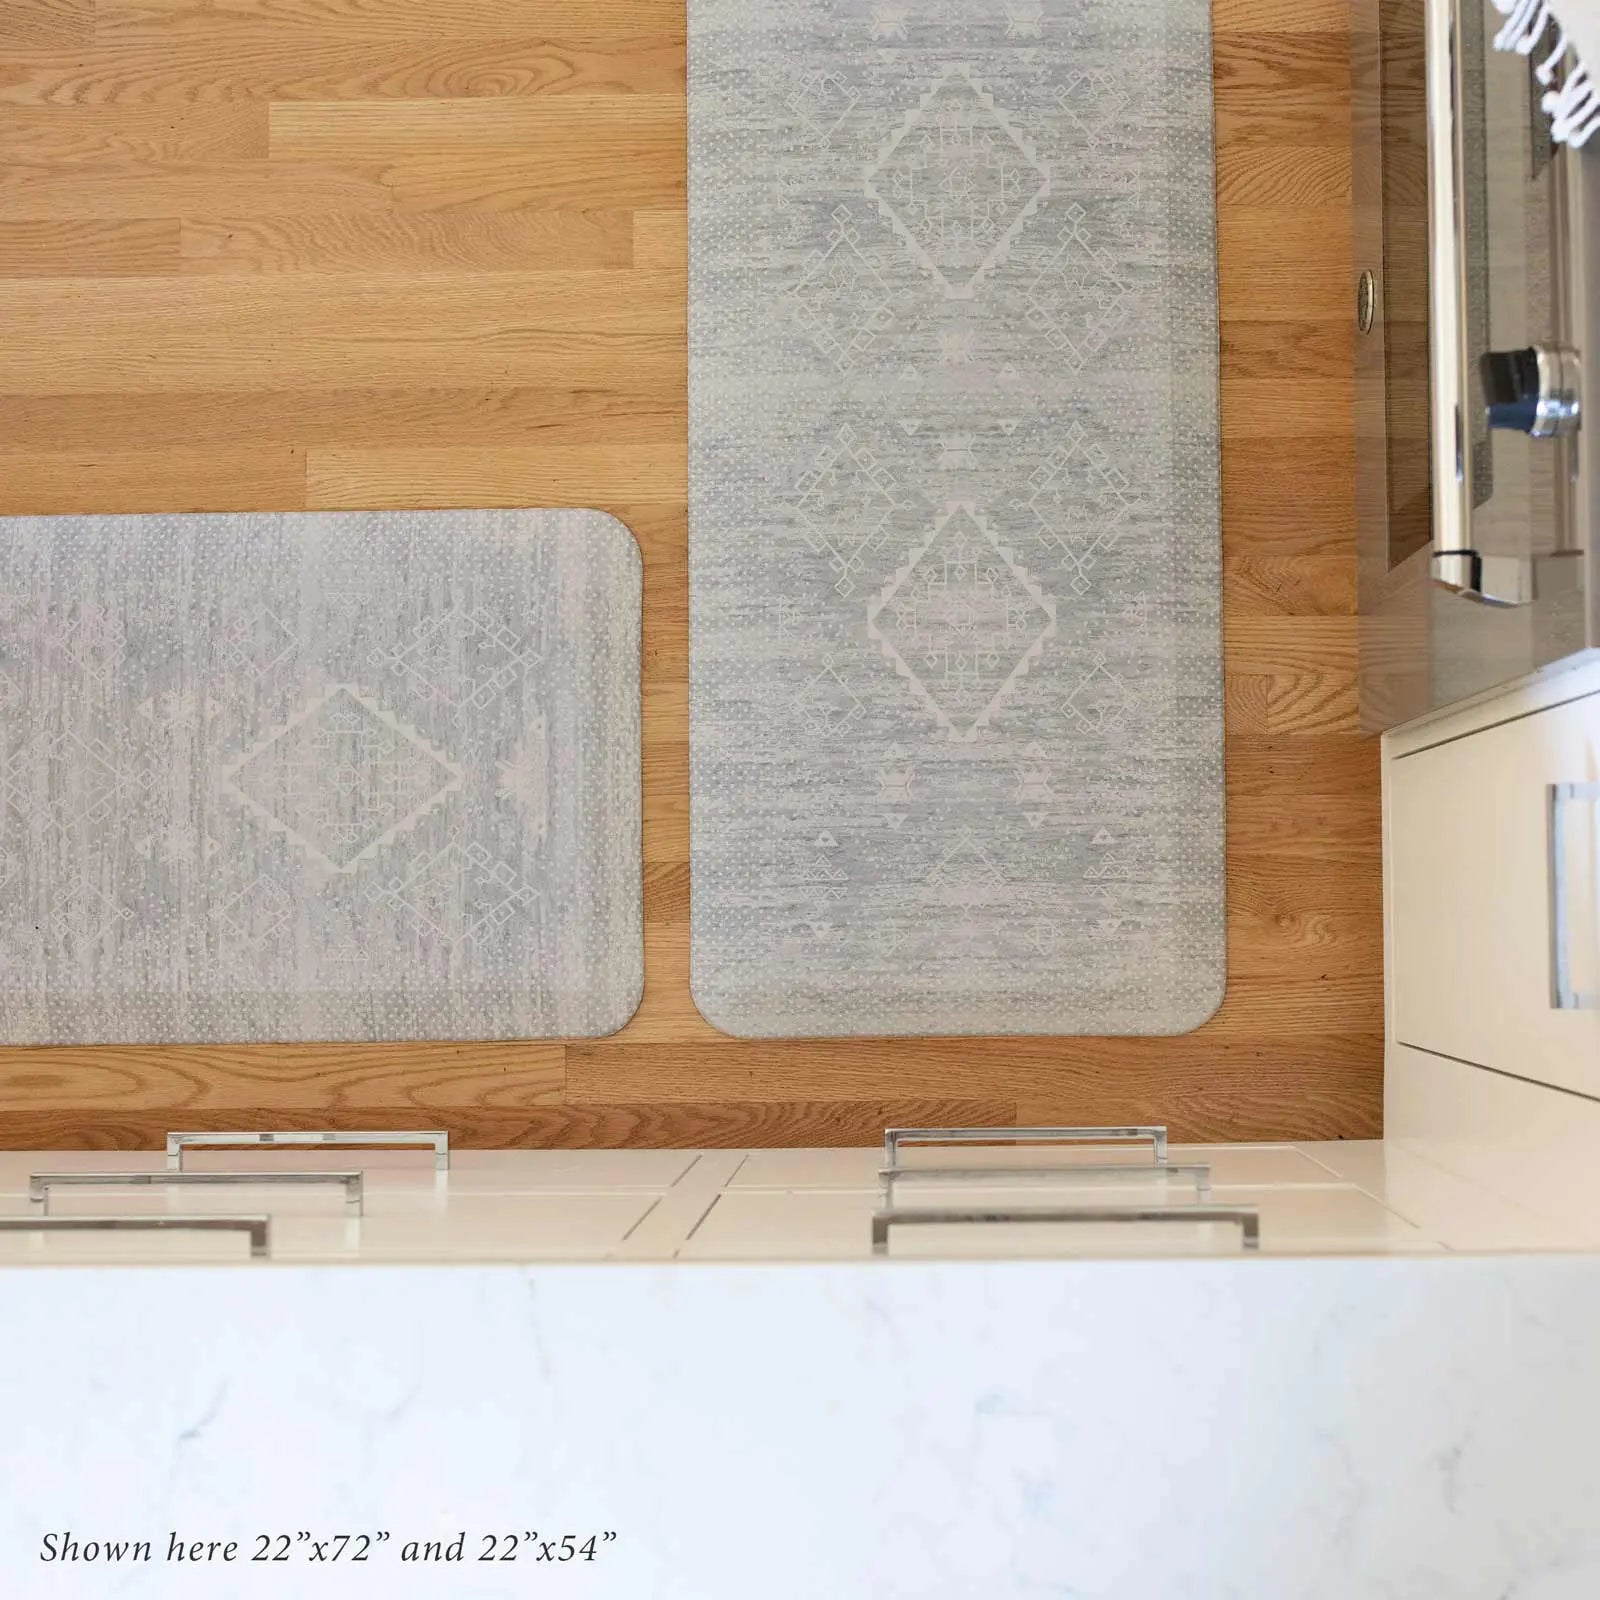 Ula gray and white Minimal Boho Pattern Standing Mat shown from above in kitchen shown in size 22x72 and 22x54